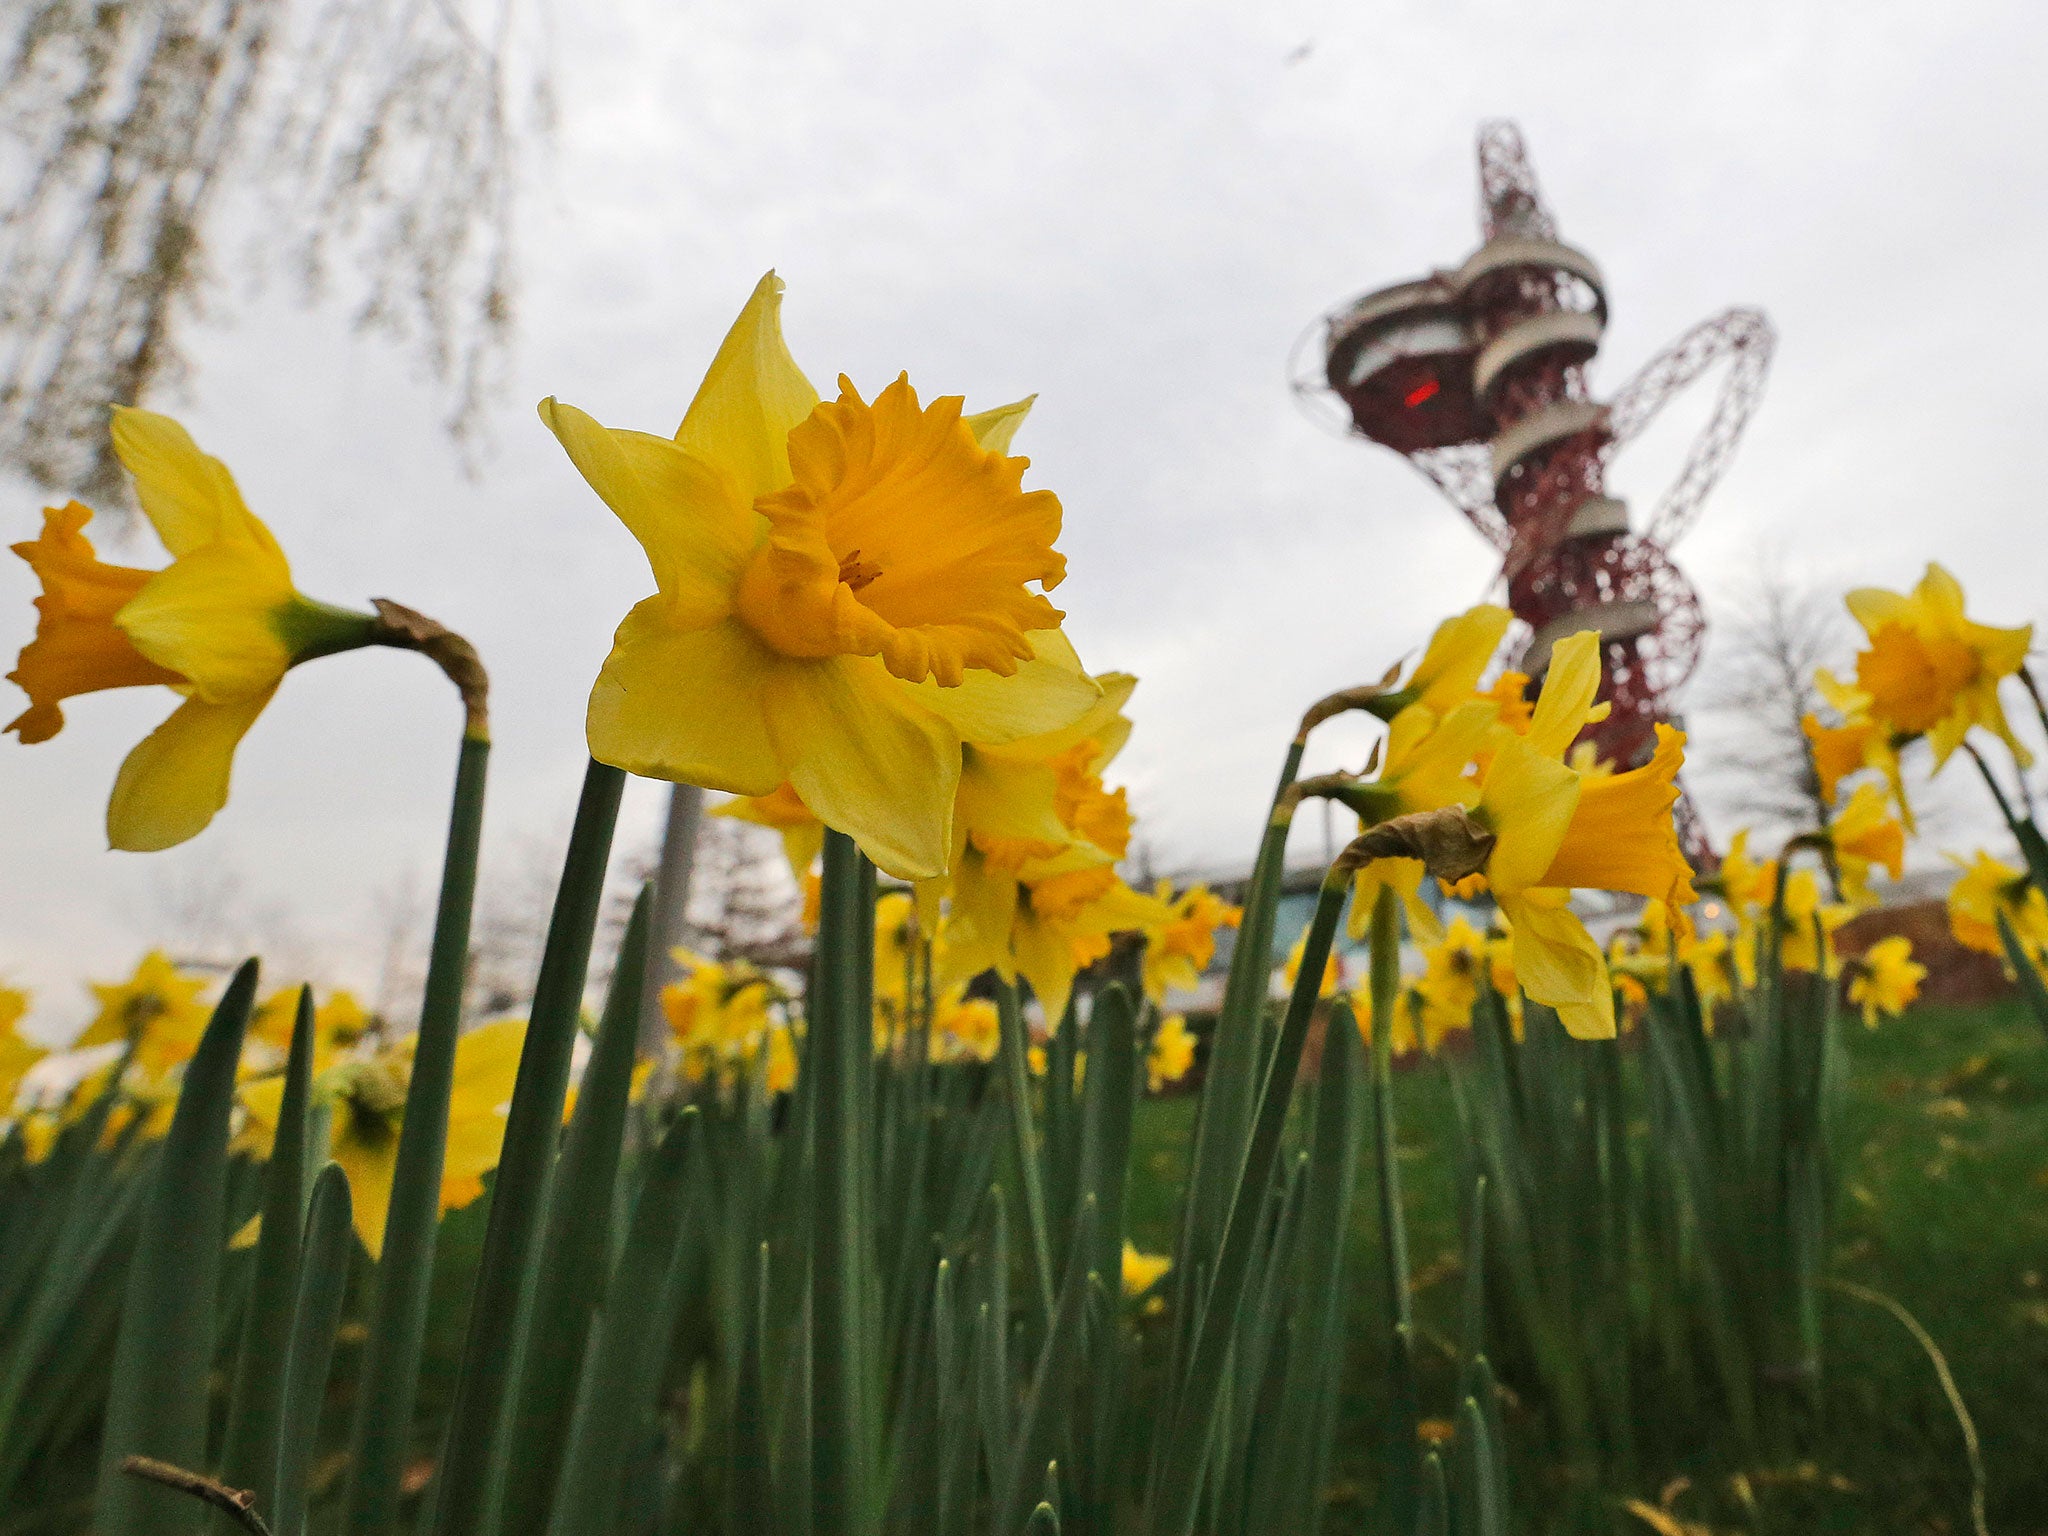 Daffodils grow at the Olympic Park in London